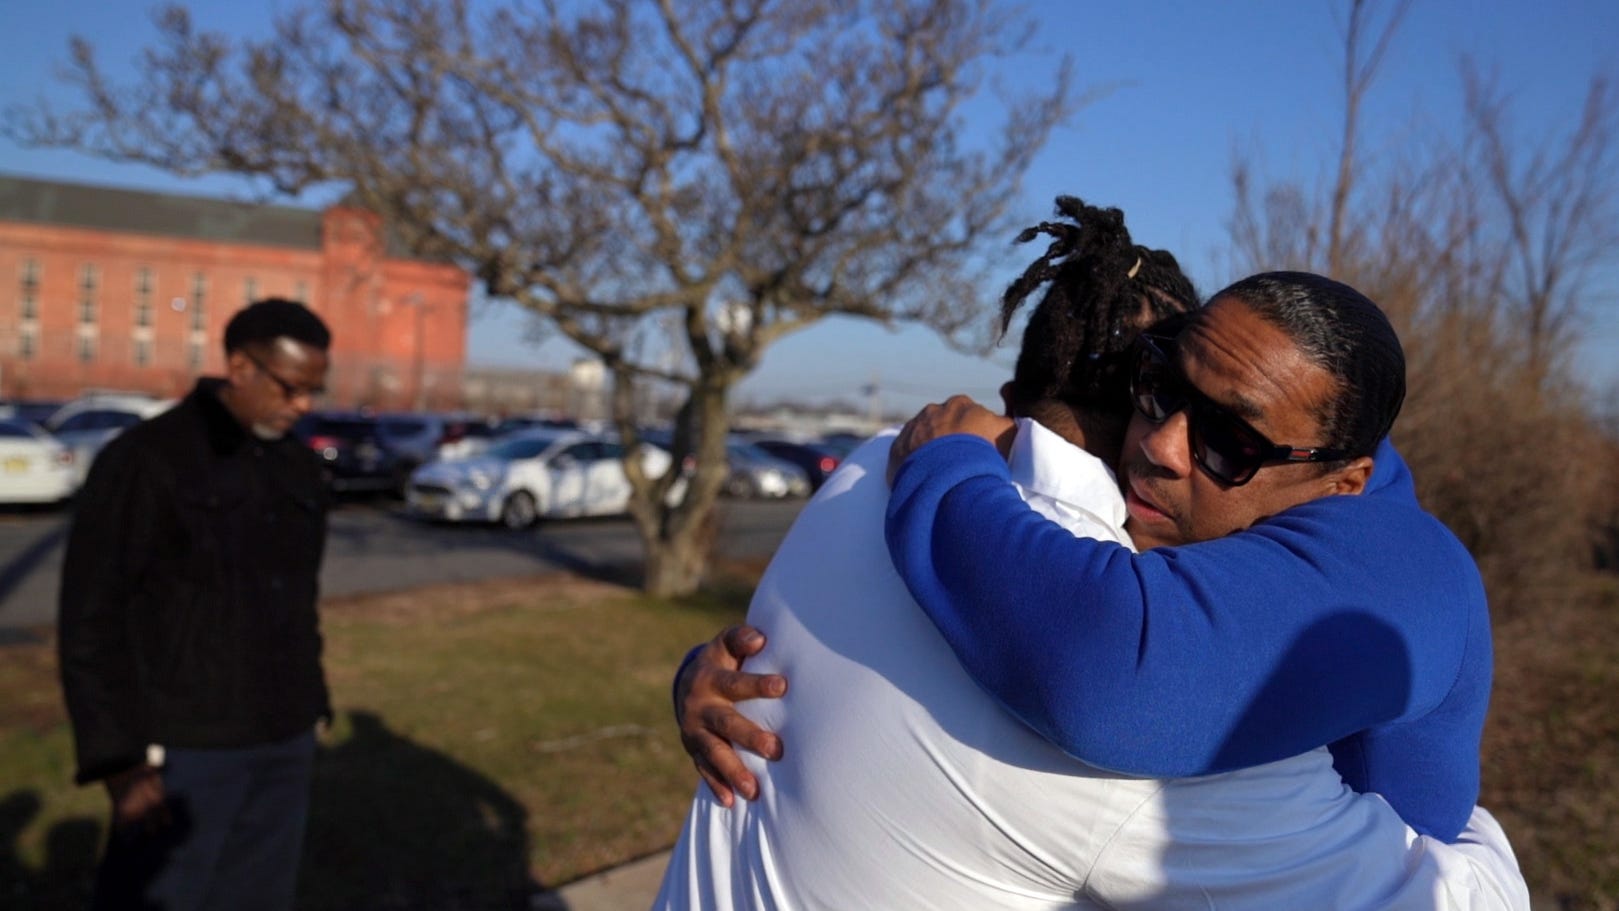 How former NJ inmates help others adjust to life after prison